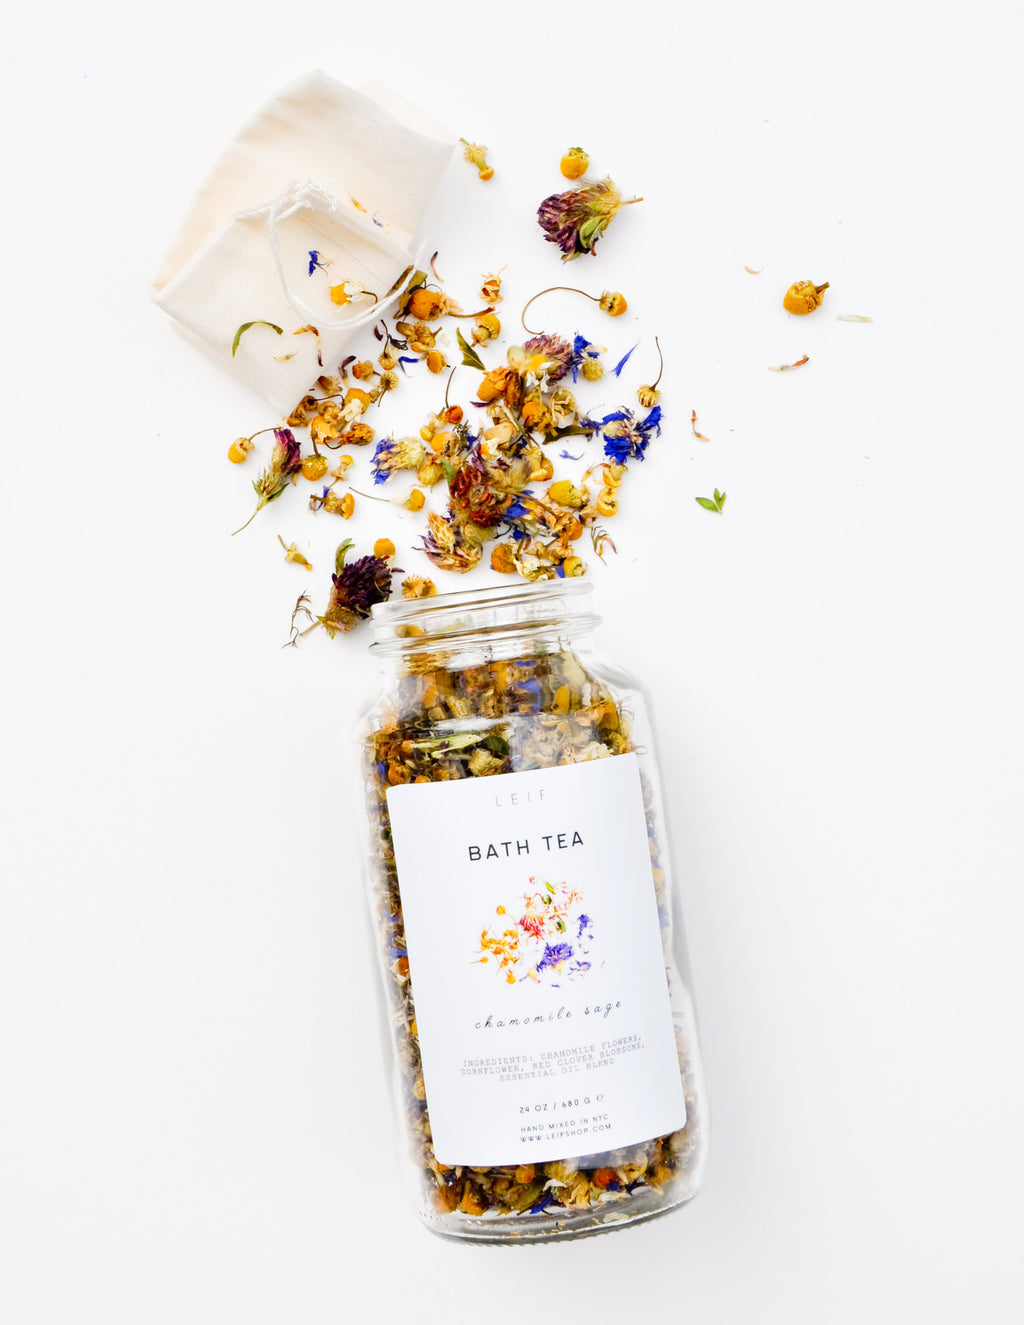 Chamomile Sage: A mix of dried botanicals and a small muslin pouch spill out of a glass jar with a white label.